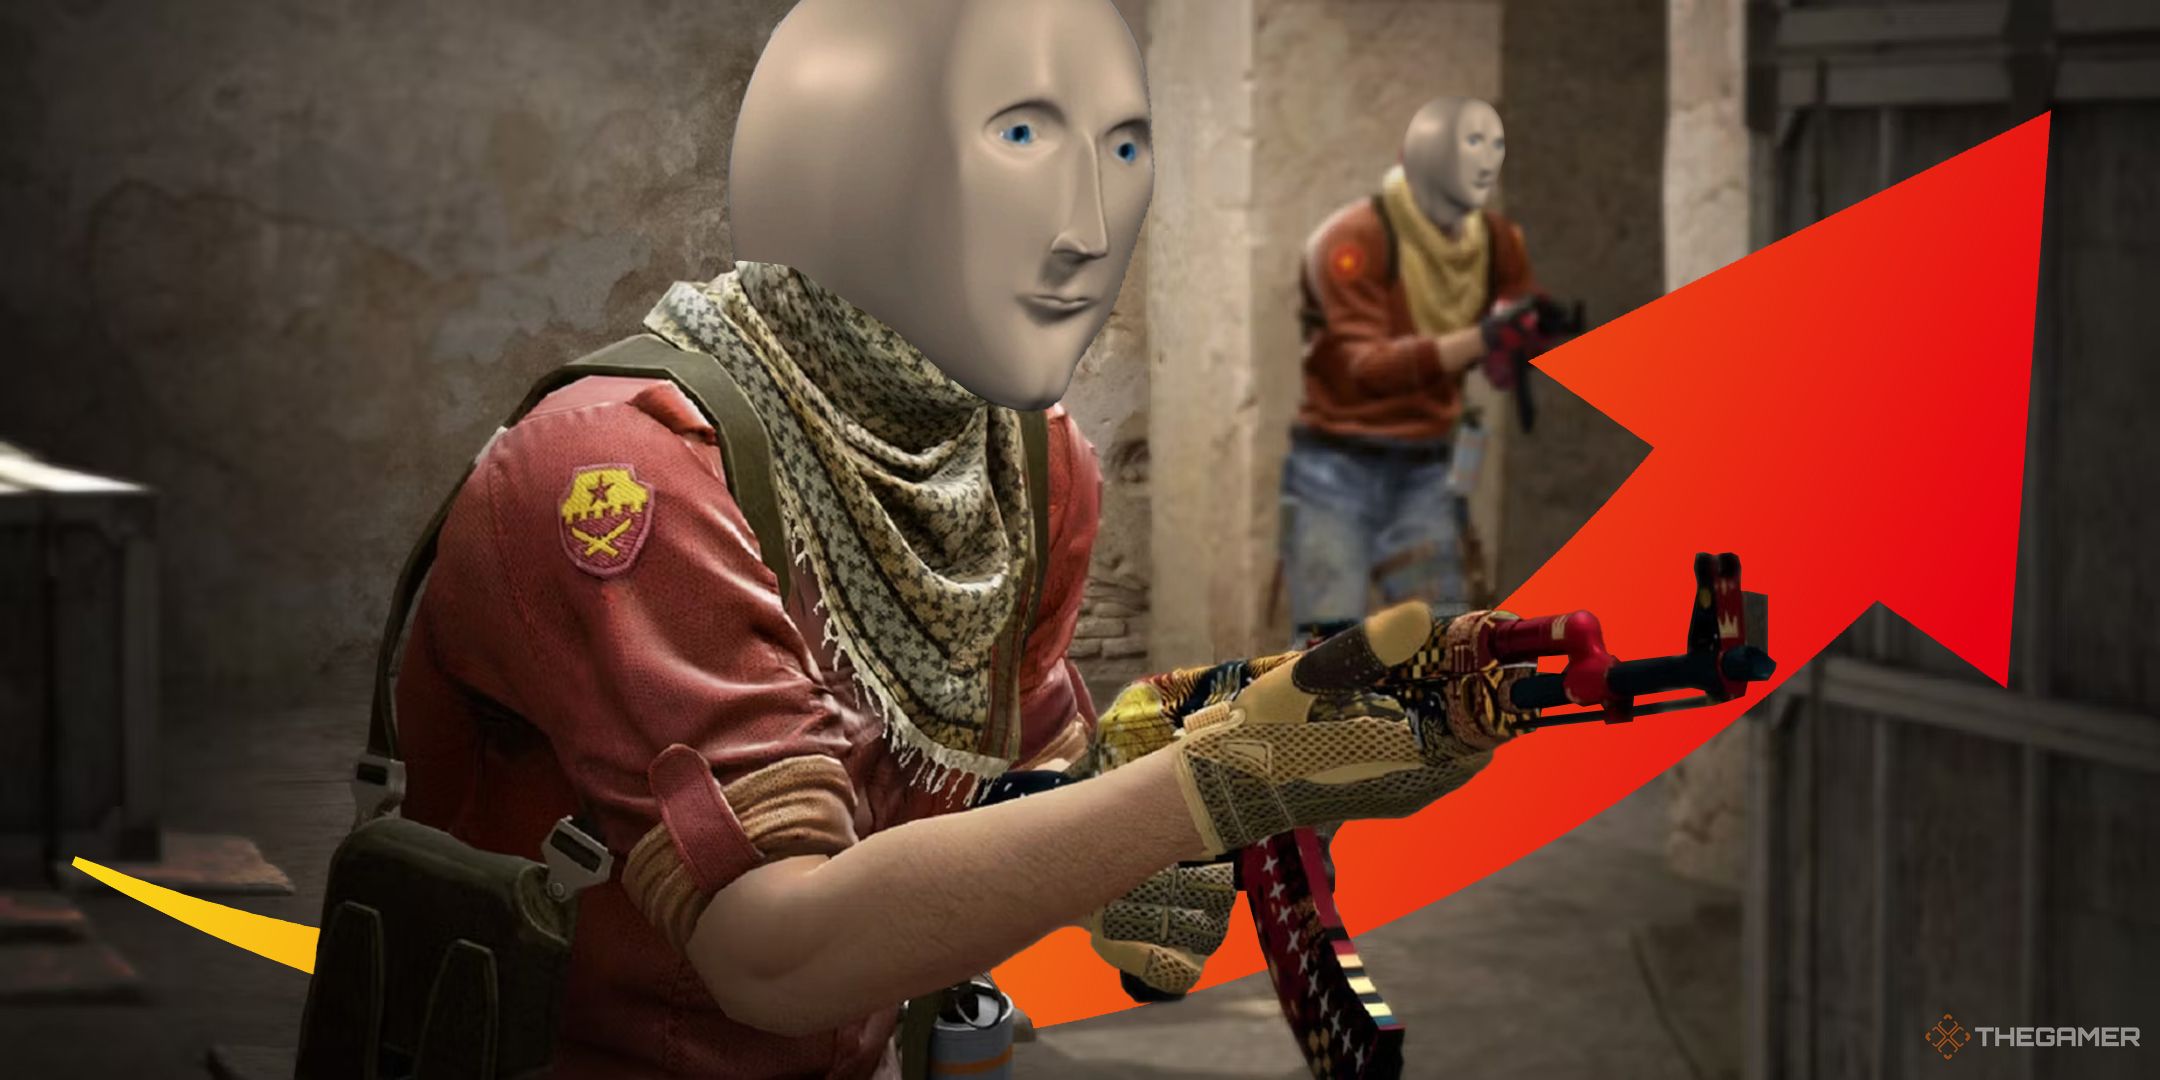 Counter-Strike 2 terrorists with AK-47s with the Stonk memes head and an arrow behind them